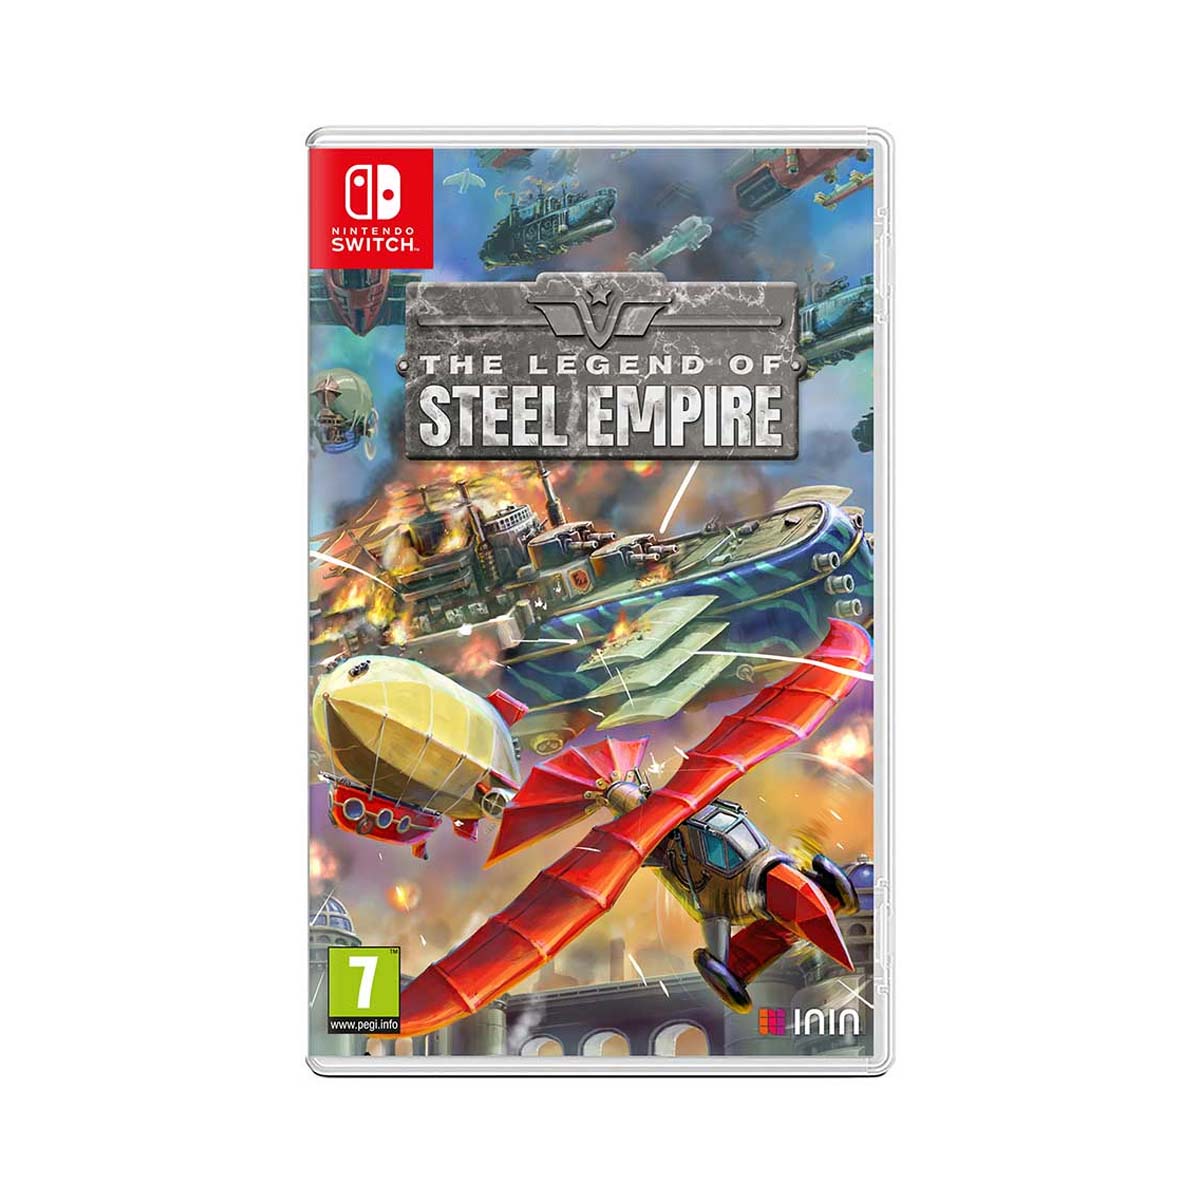 Photos - Game United  The Legend of Steel Empire - Nintedo Switch 